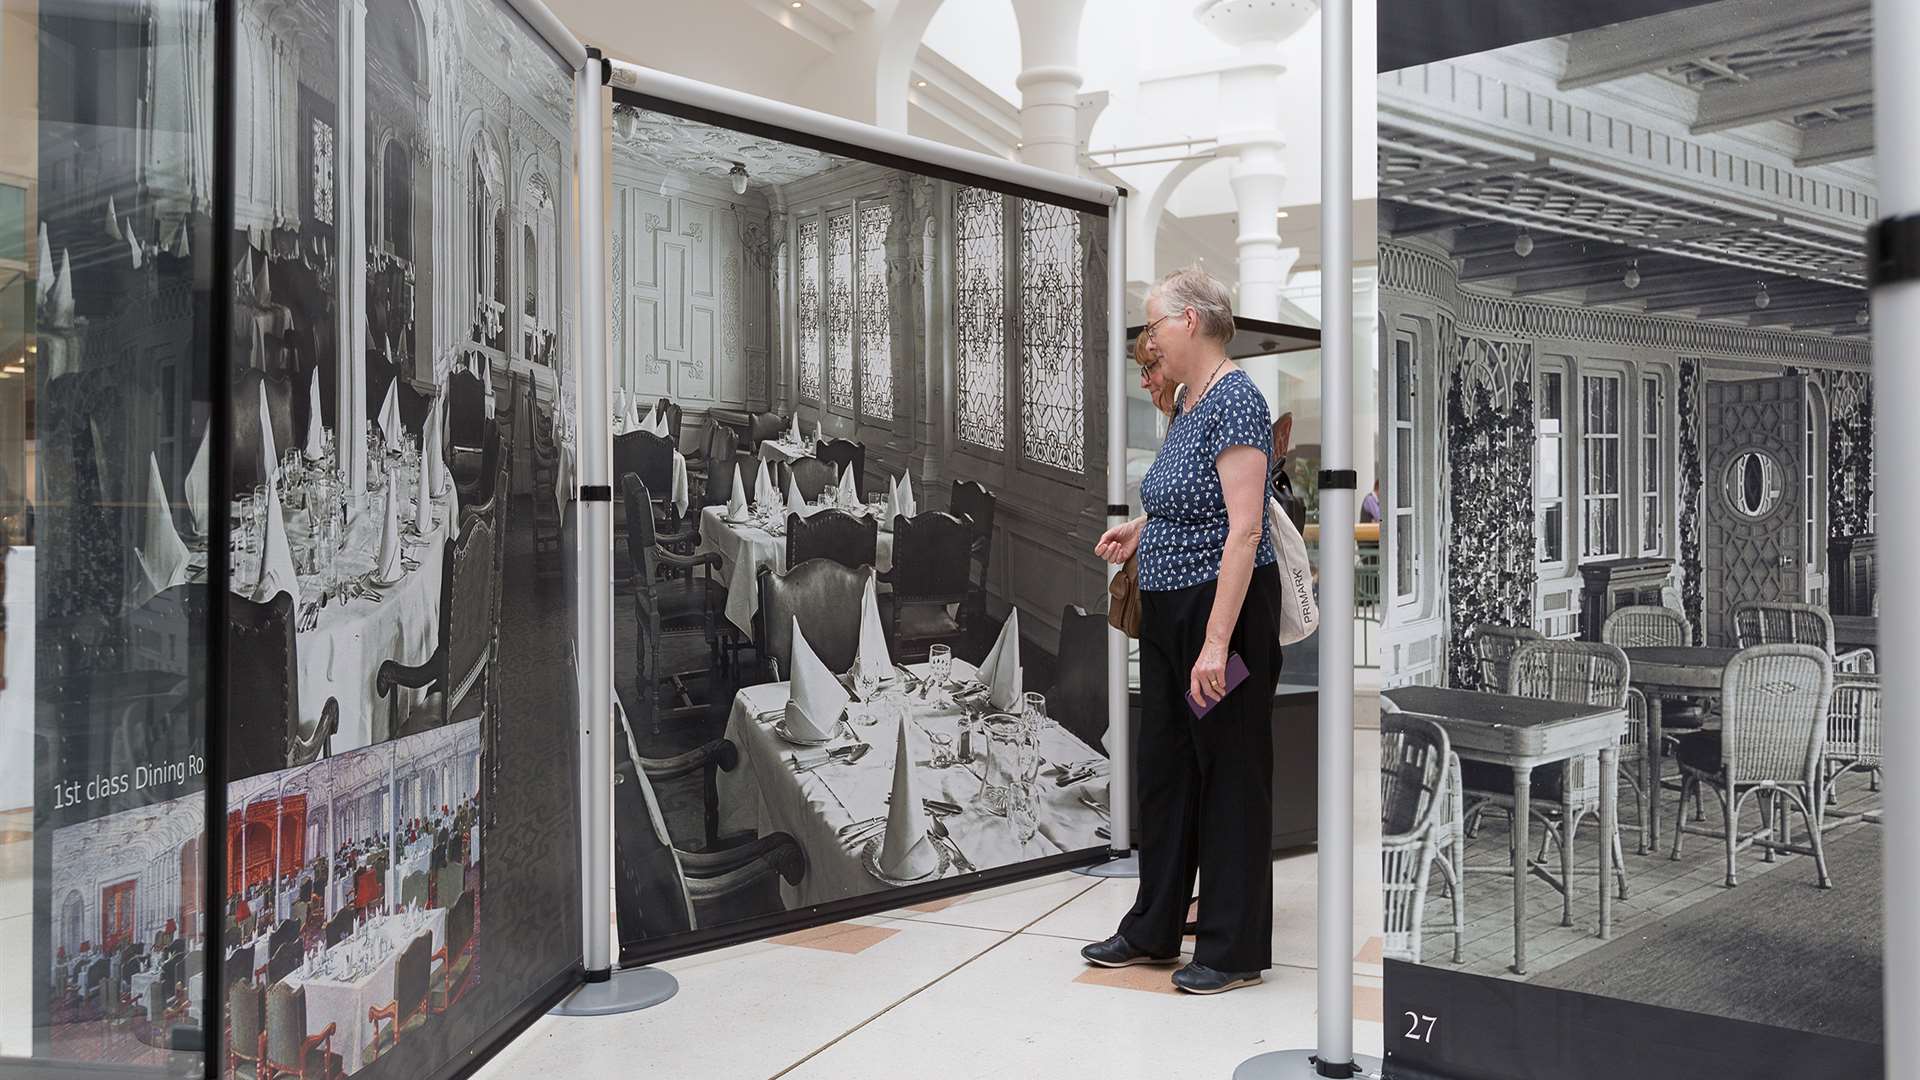 The Titanic In Photographs Exhibition at Royal Victoria Place